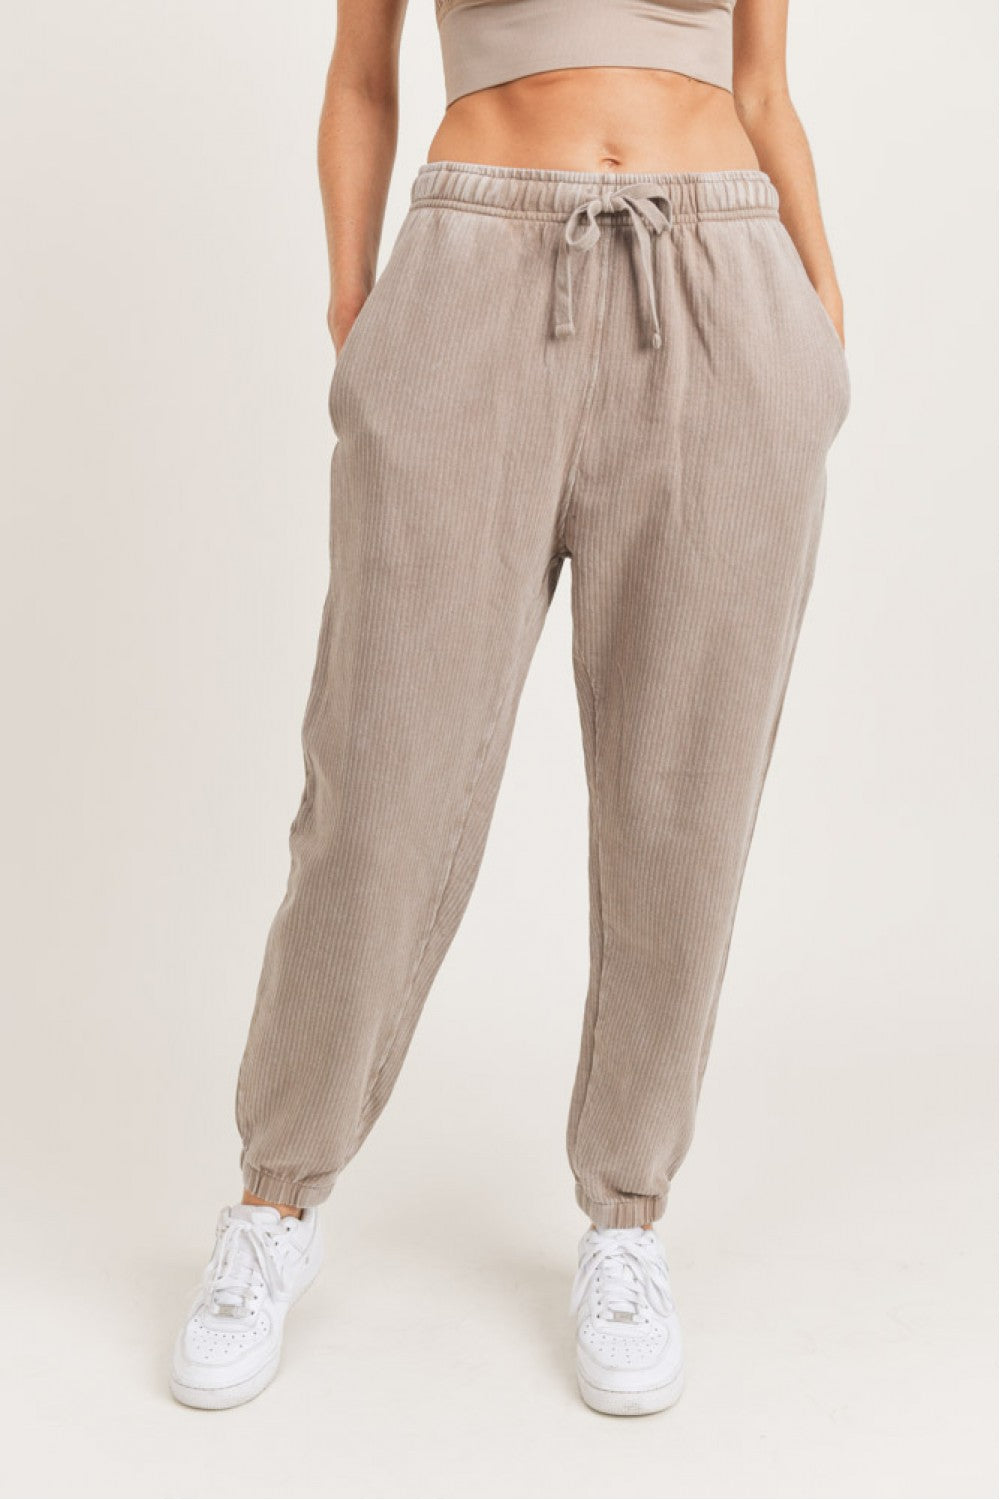 LIGHT SAND MINERAL WASH RIBBED JOGGERS